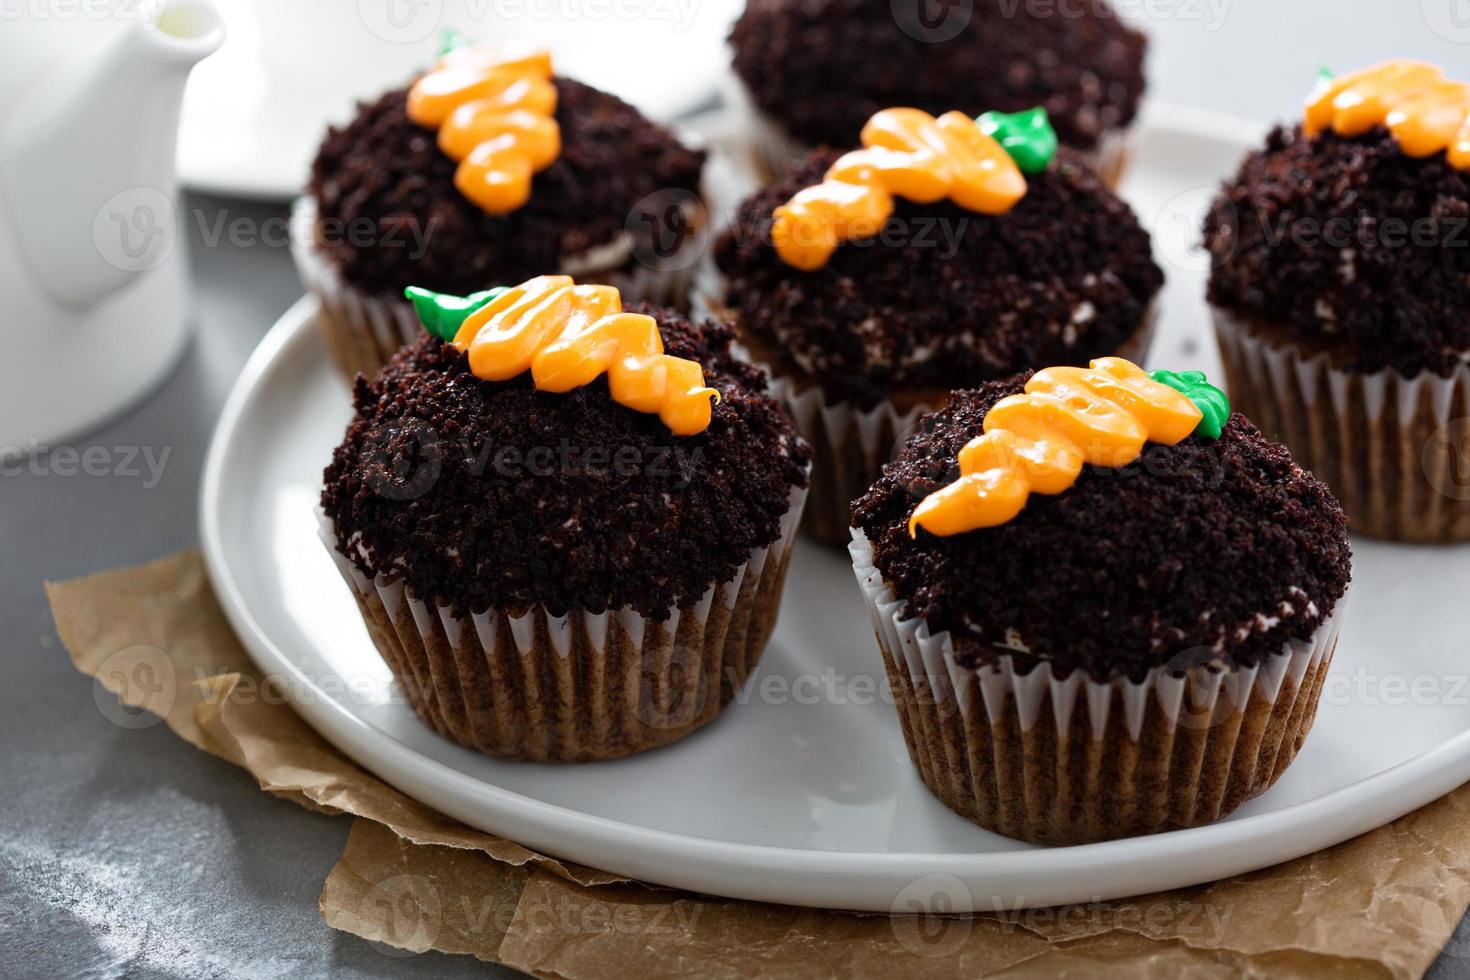 Carrot cupcakes with chocolate crumbs and frosting photo